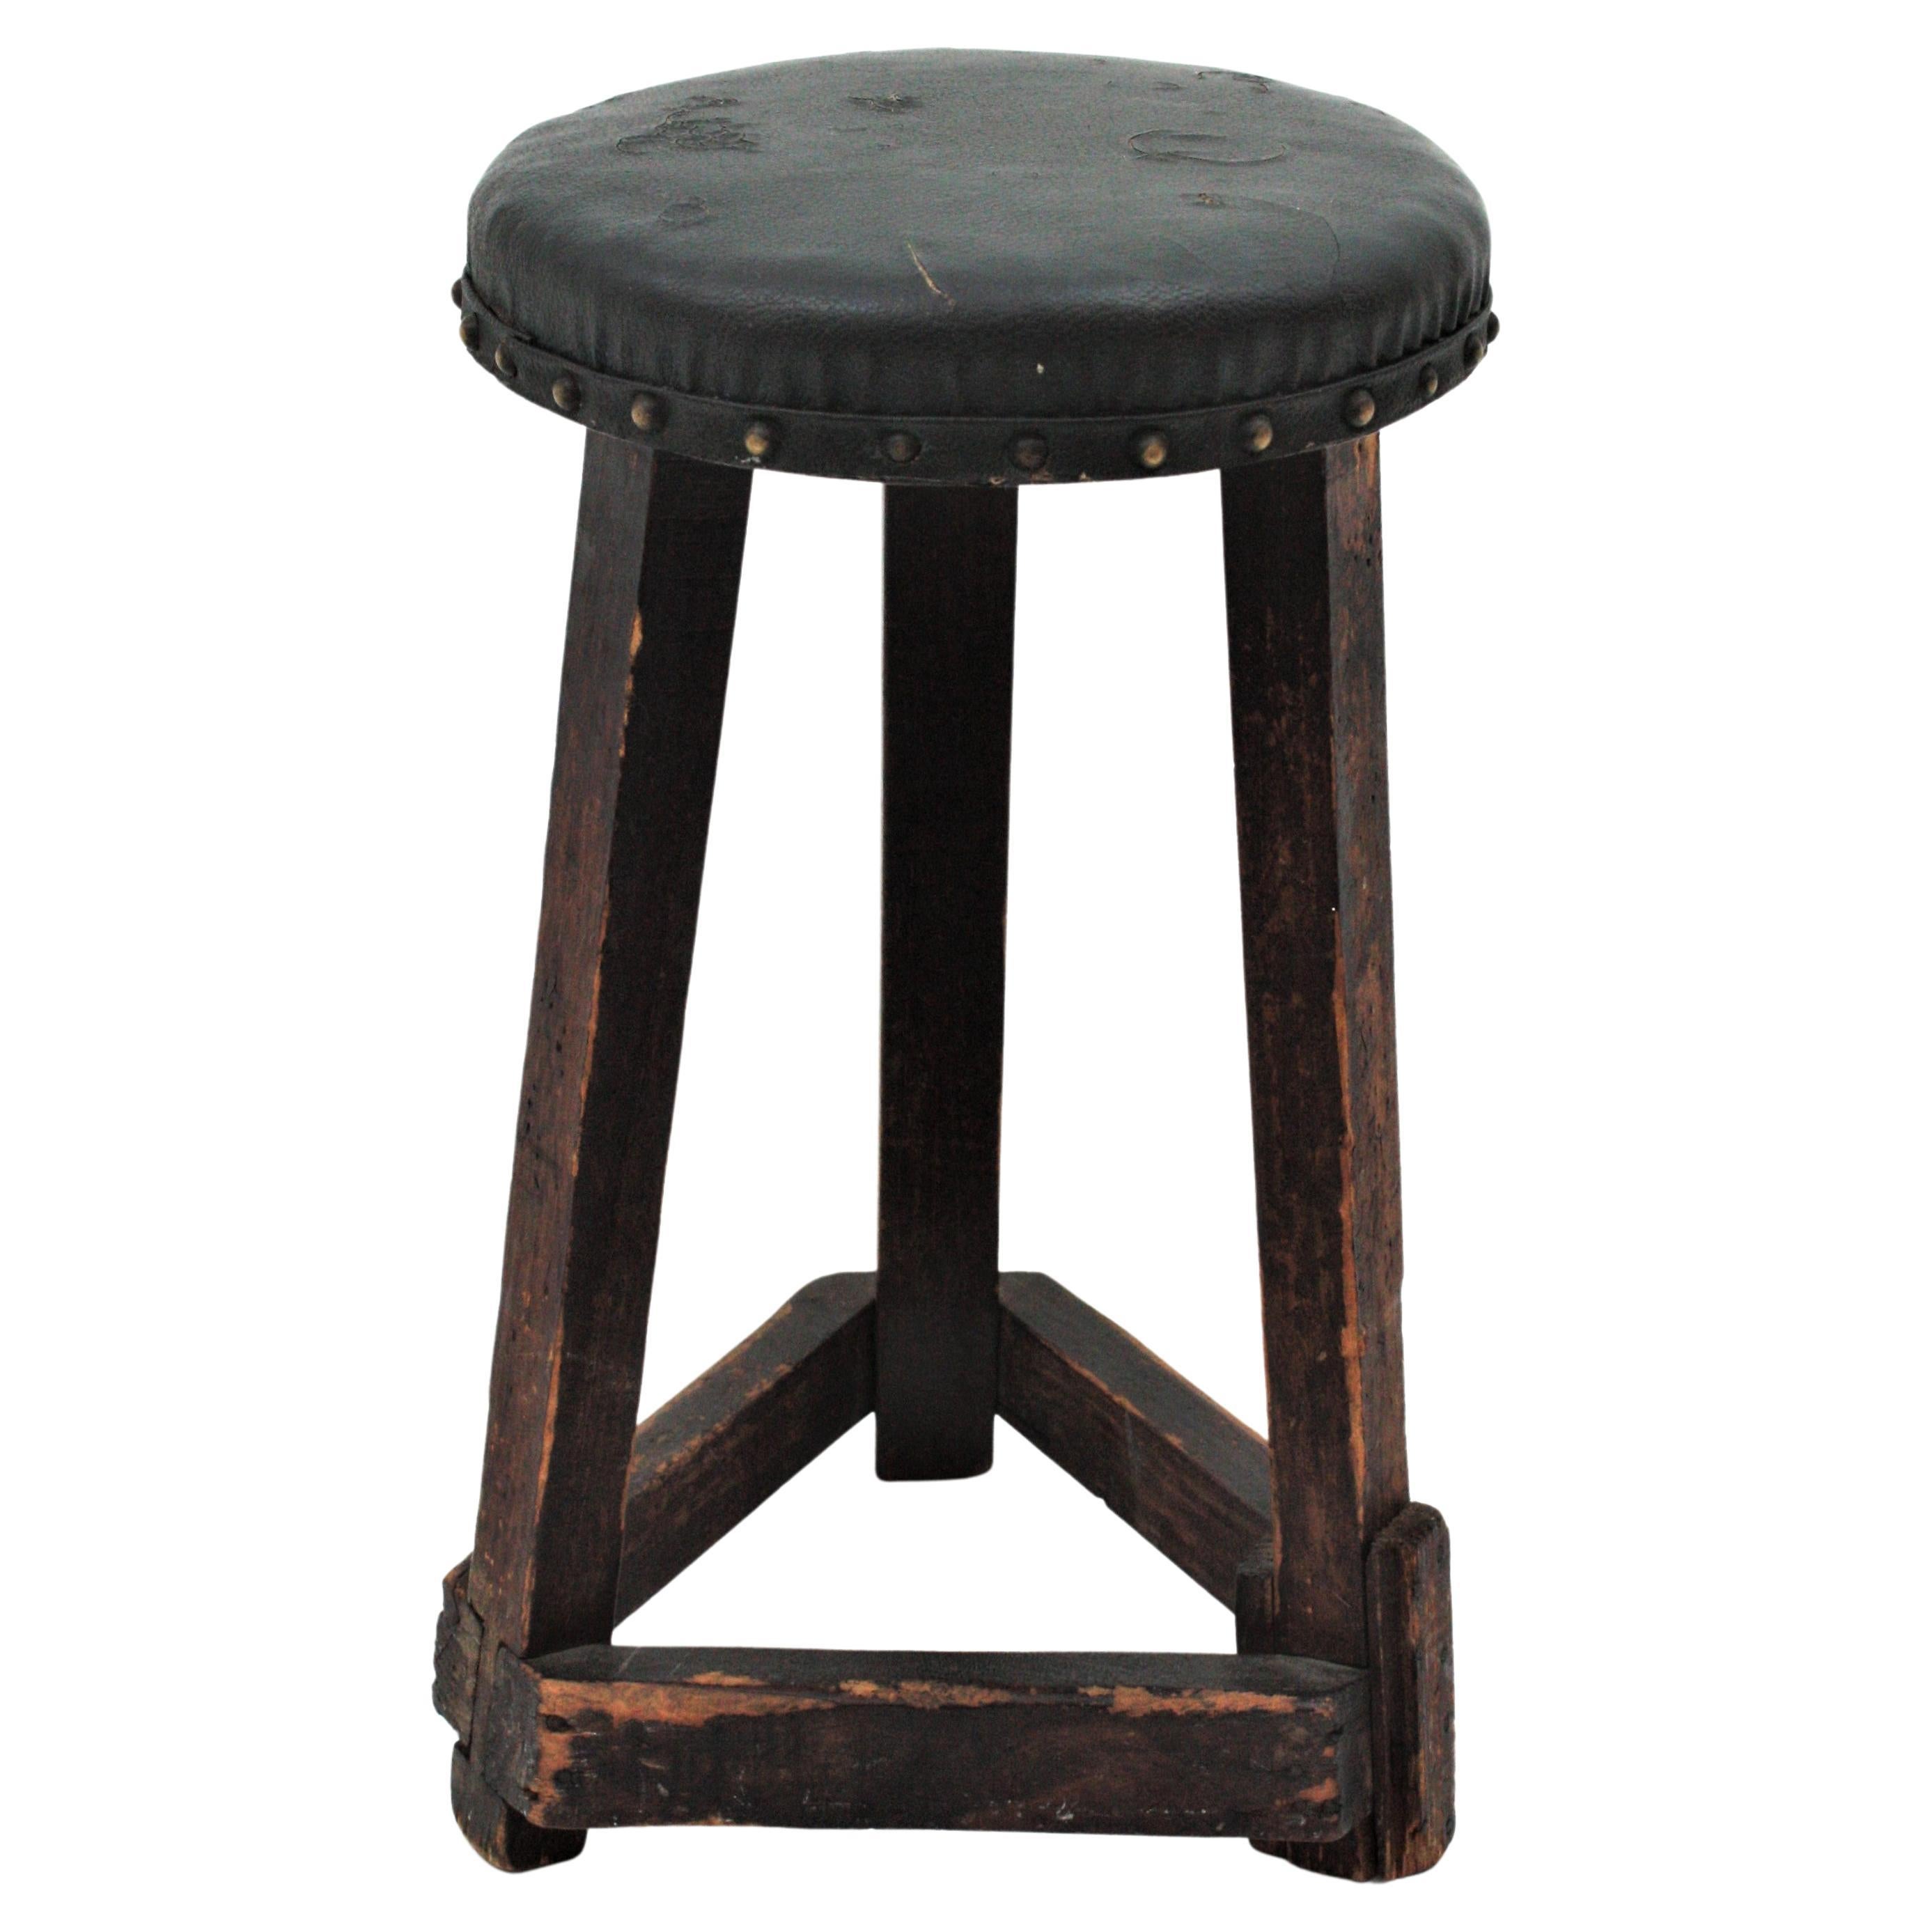 Industrial Wood stool with a three-legged base and canvas round seat. Spain, 1920s-1930s.
This workshop stool has a heavy construction, great shape and character. It has three legs with wood strecthers joining each leg. The top is upholstered in